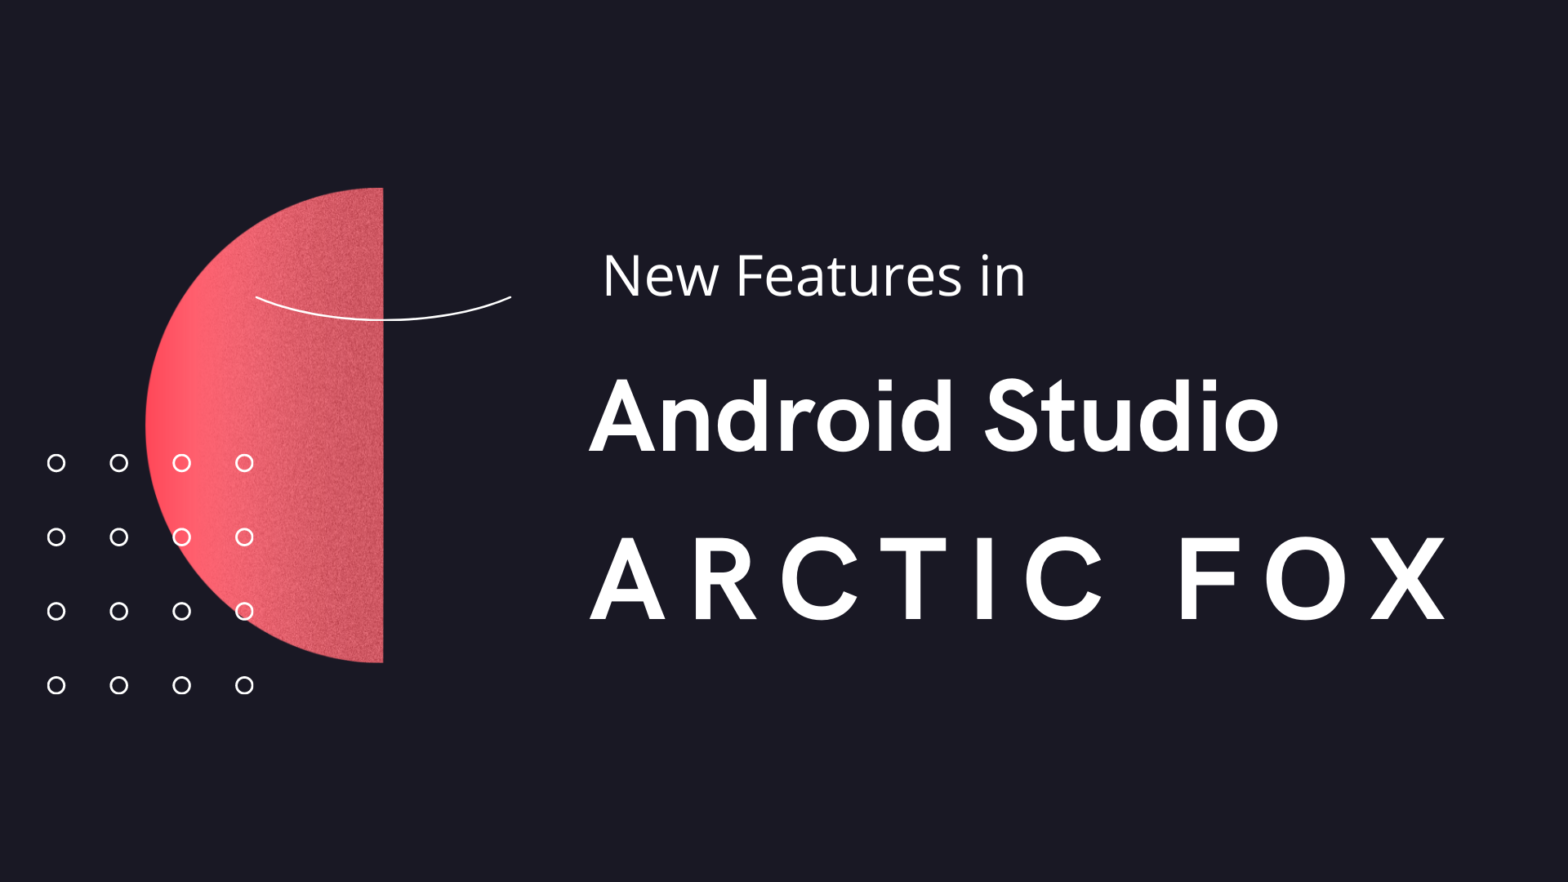 New Features in Android Studio Arctic Fox